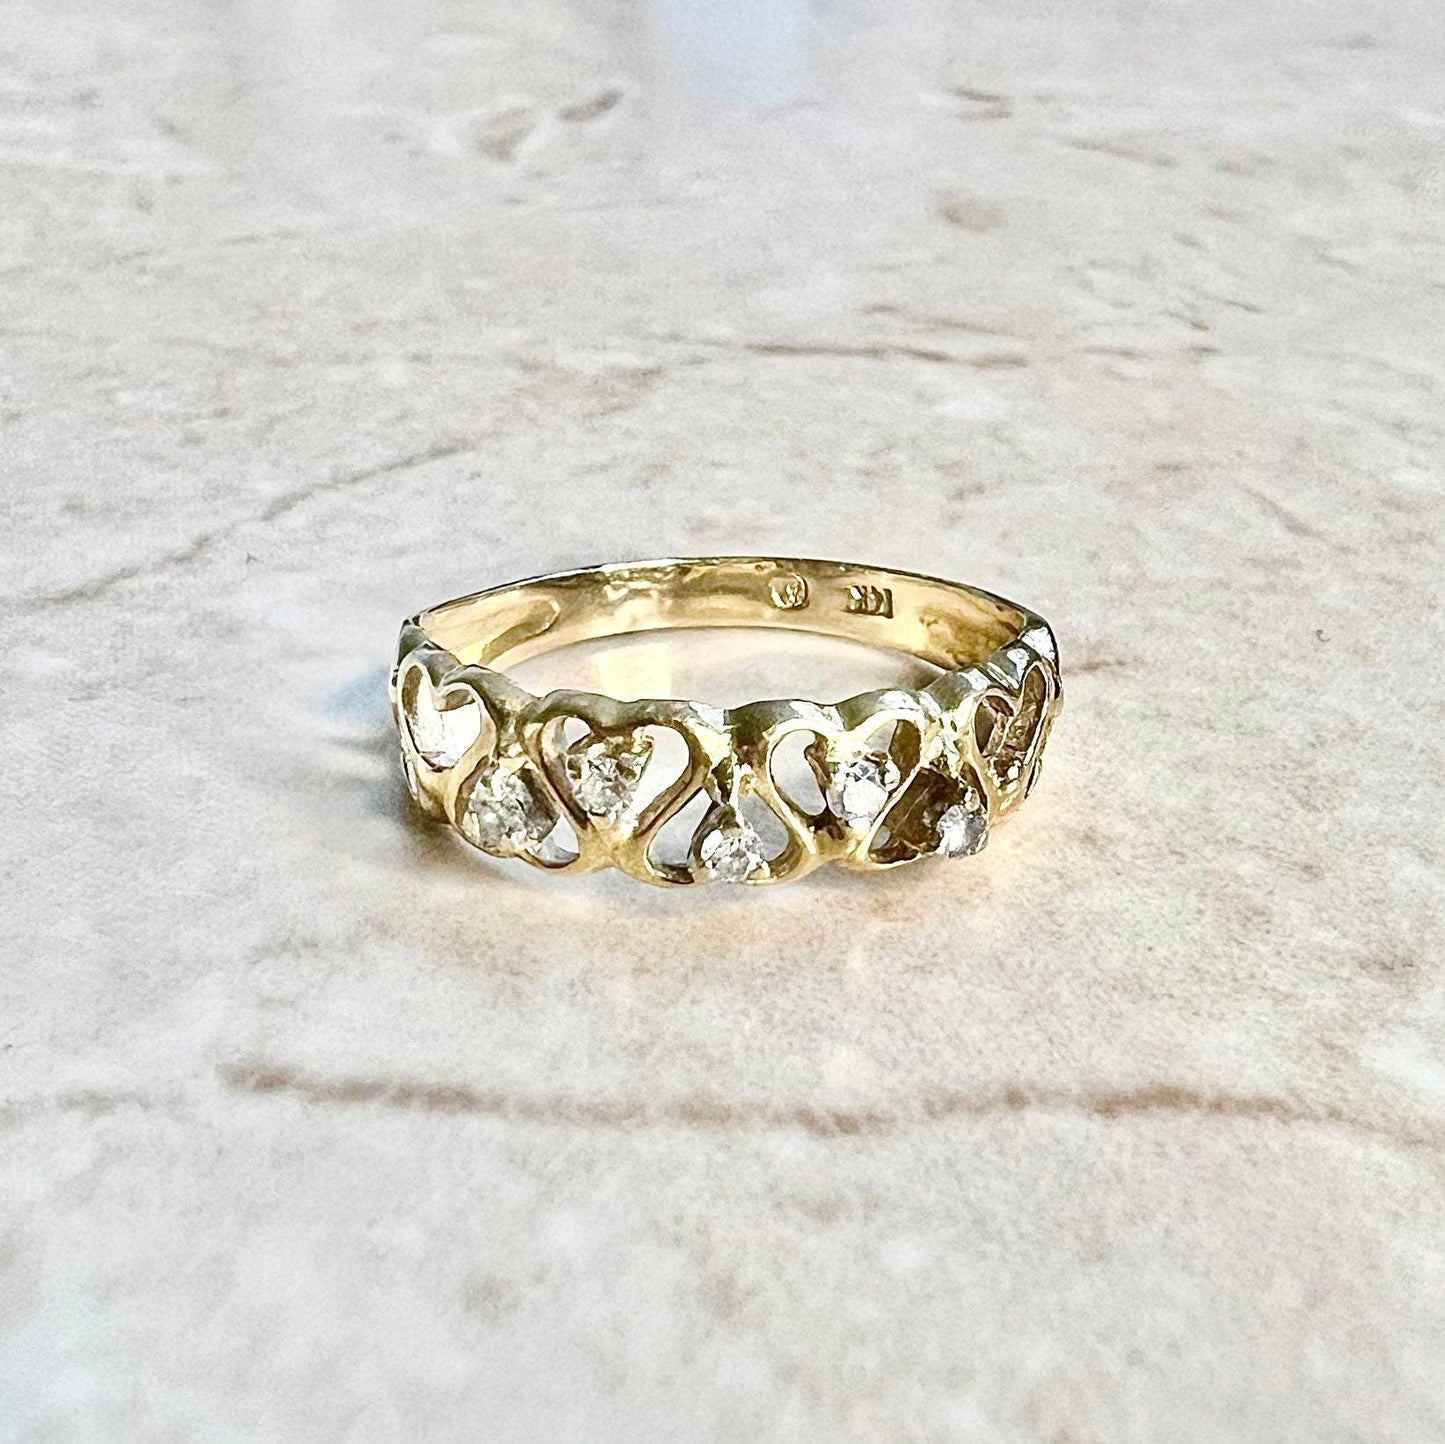 14K Diamond Heart Band Ring - Yellow Gold Diamond Ring - Diamond Band - Heart Ring - Diamond Promise Ring - Valentine’s Day Gifts For Her